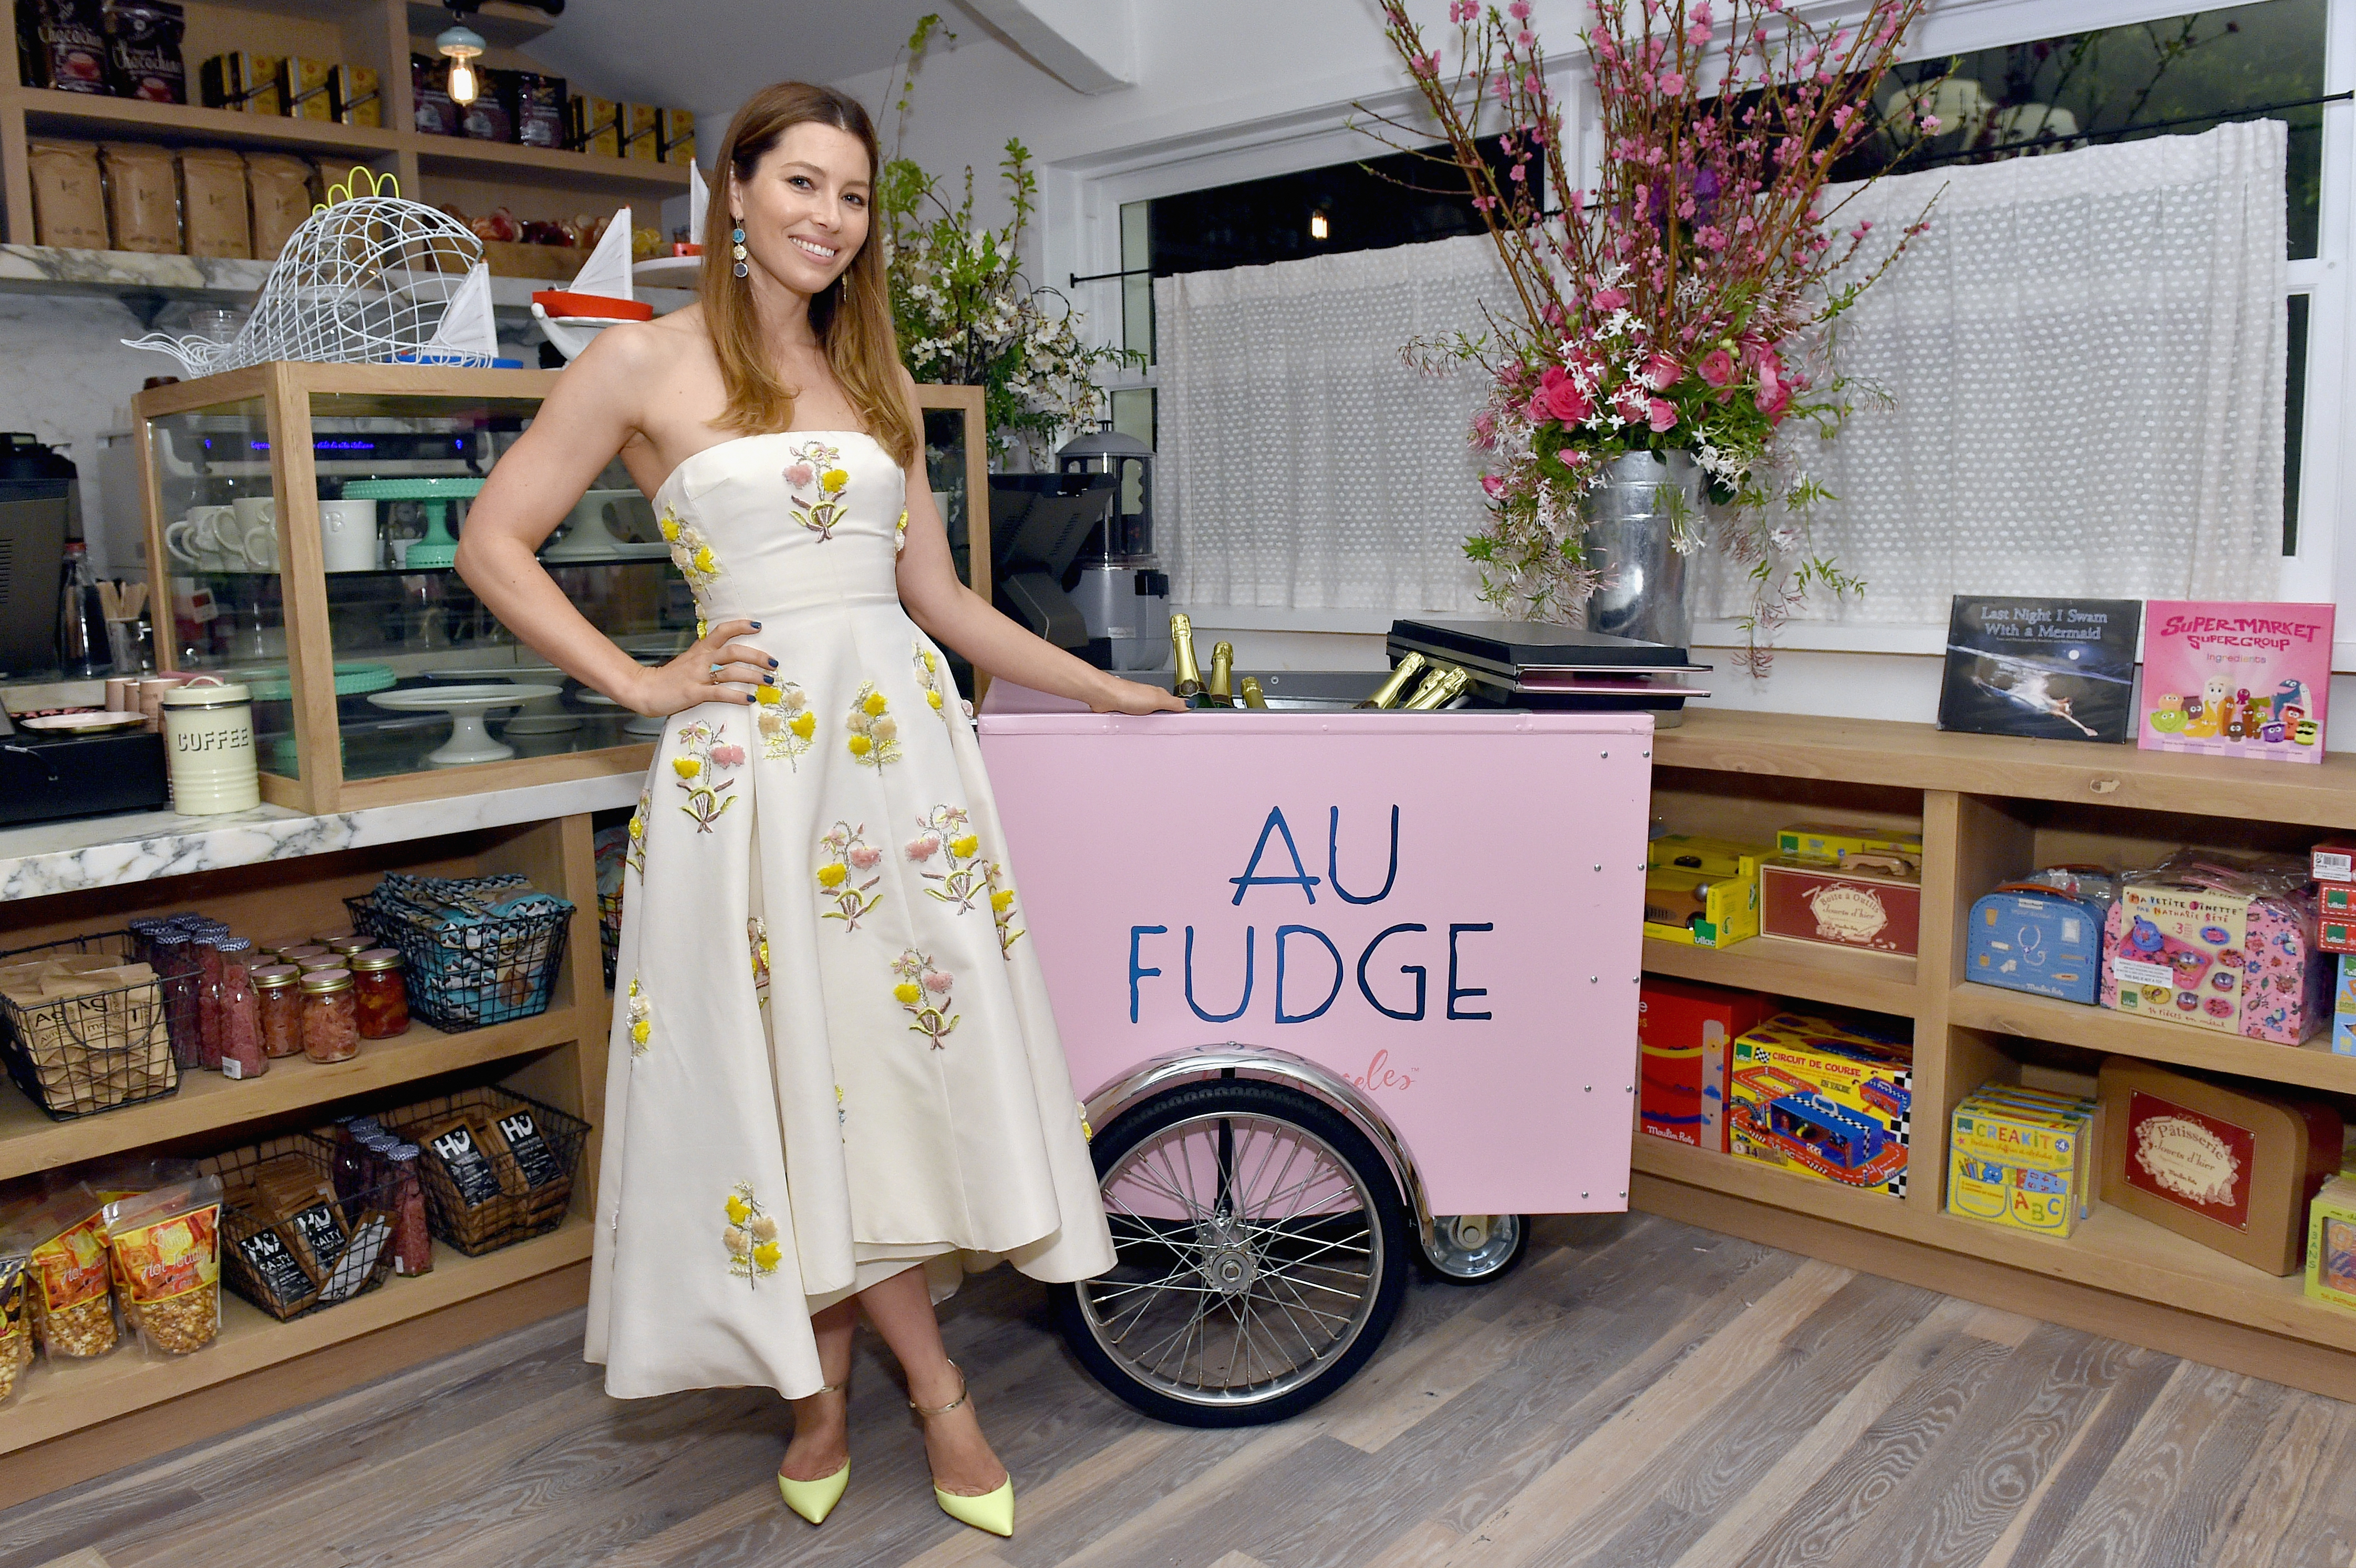 Grand Opening Of Au Fudge, Presented By Amazon Family